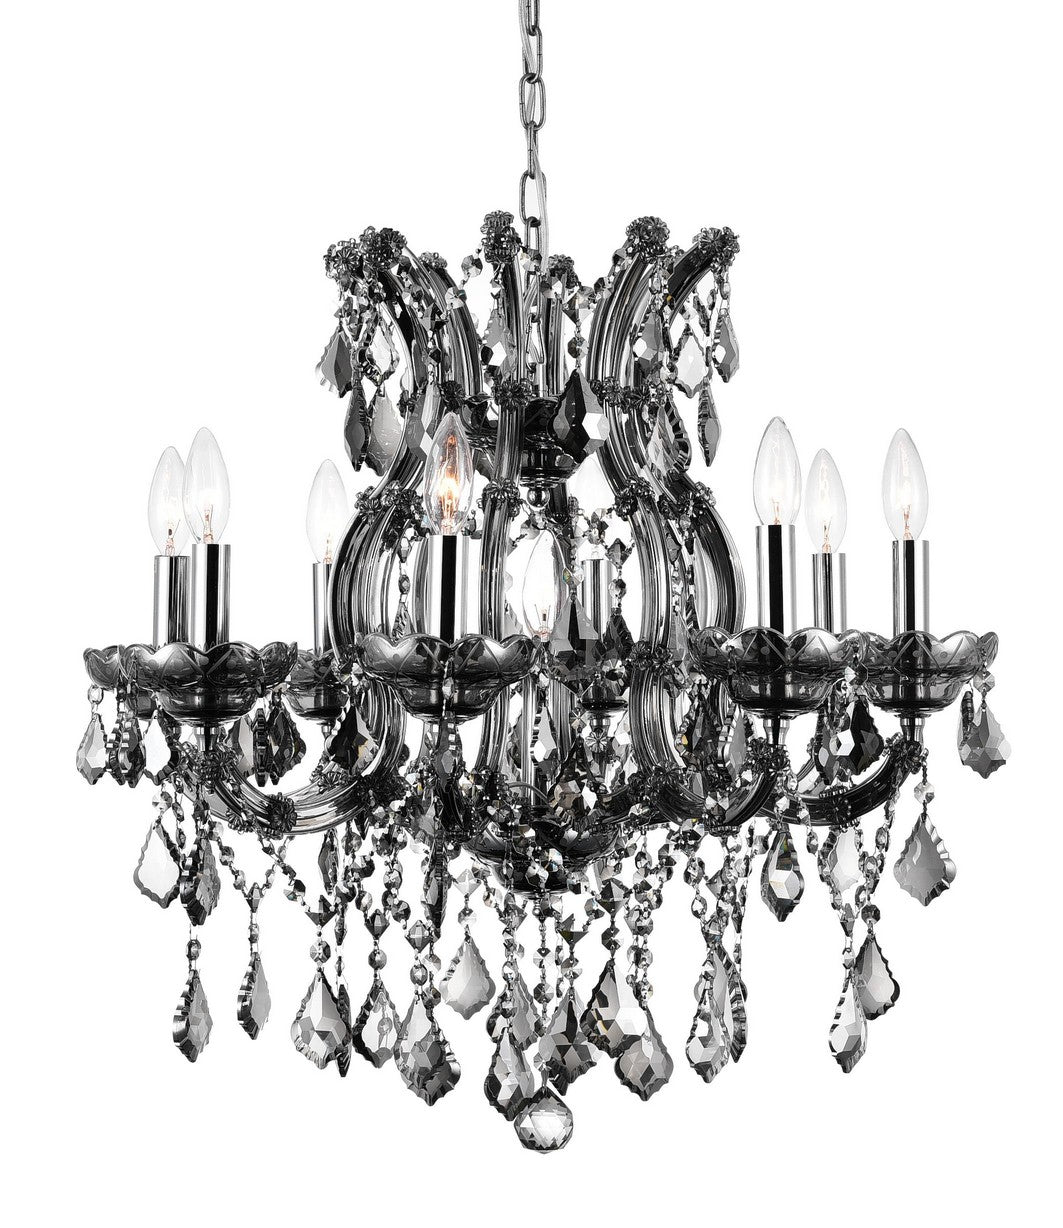 9 LIGHT UP CHANDELIER WITH CHROME FINISH - Dreamart Gallery